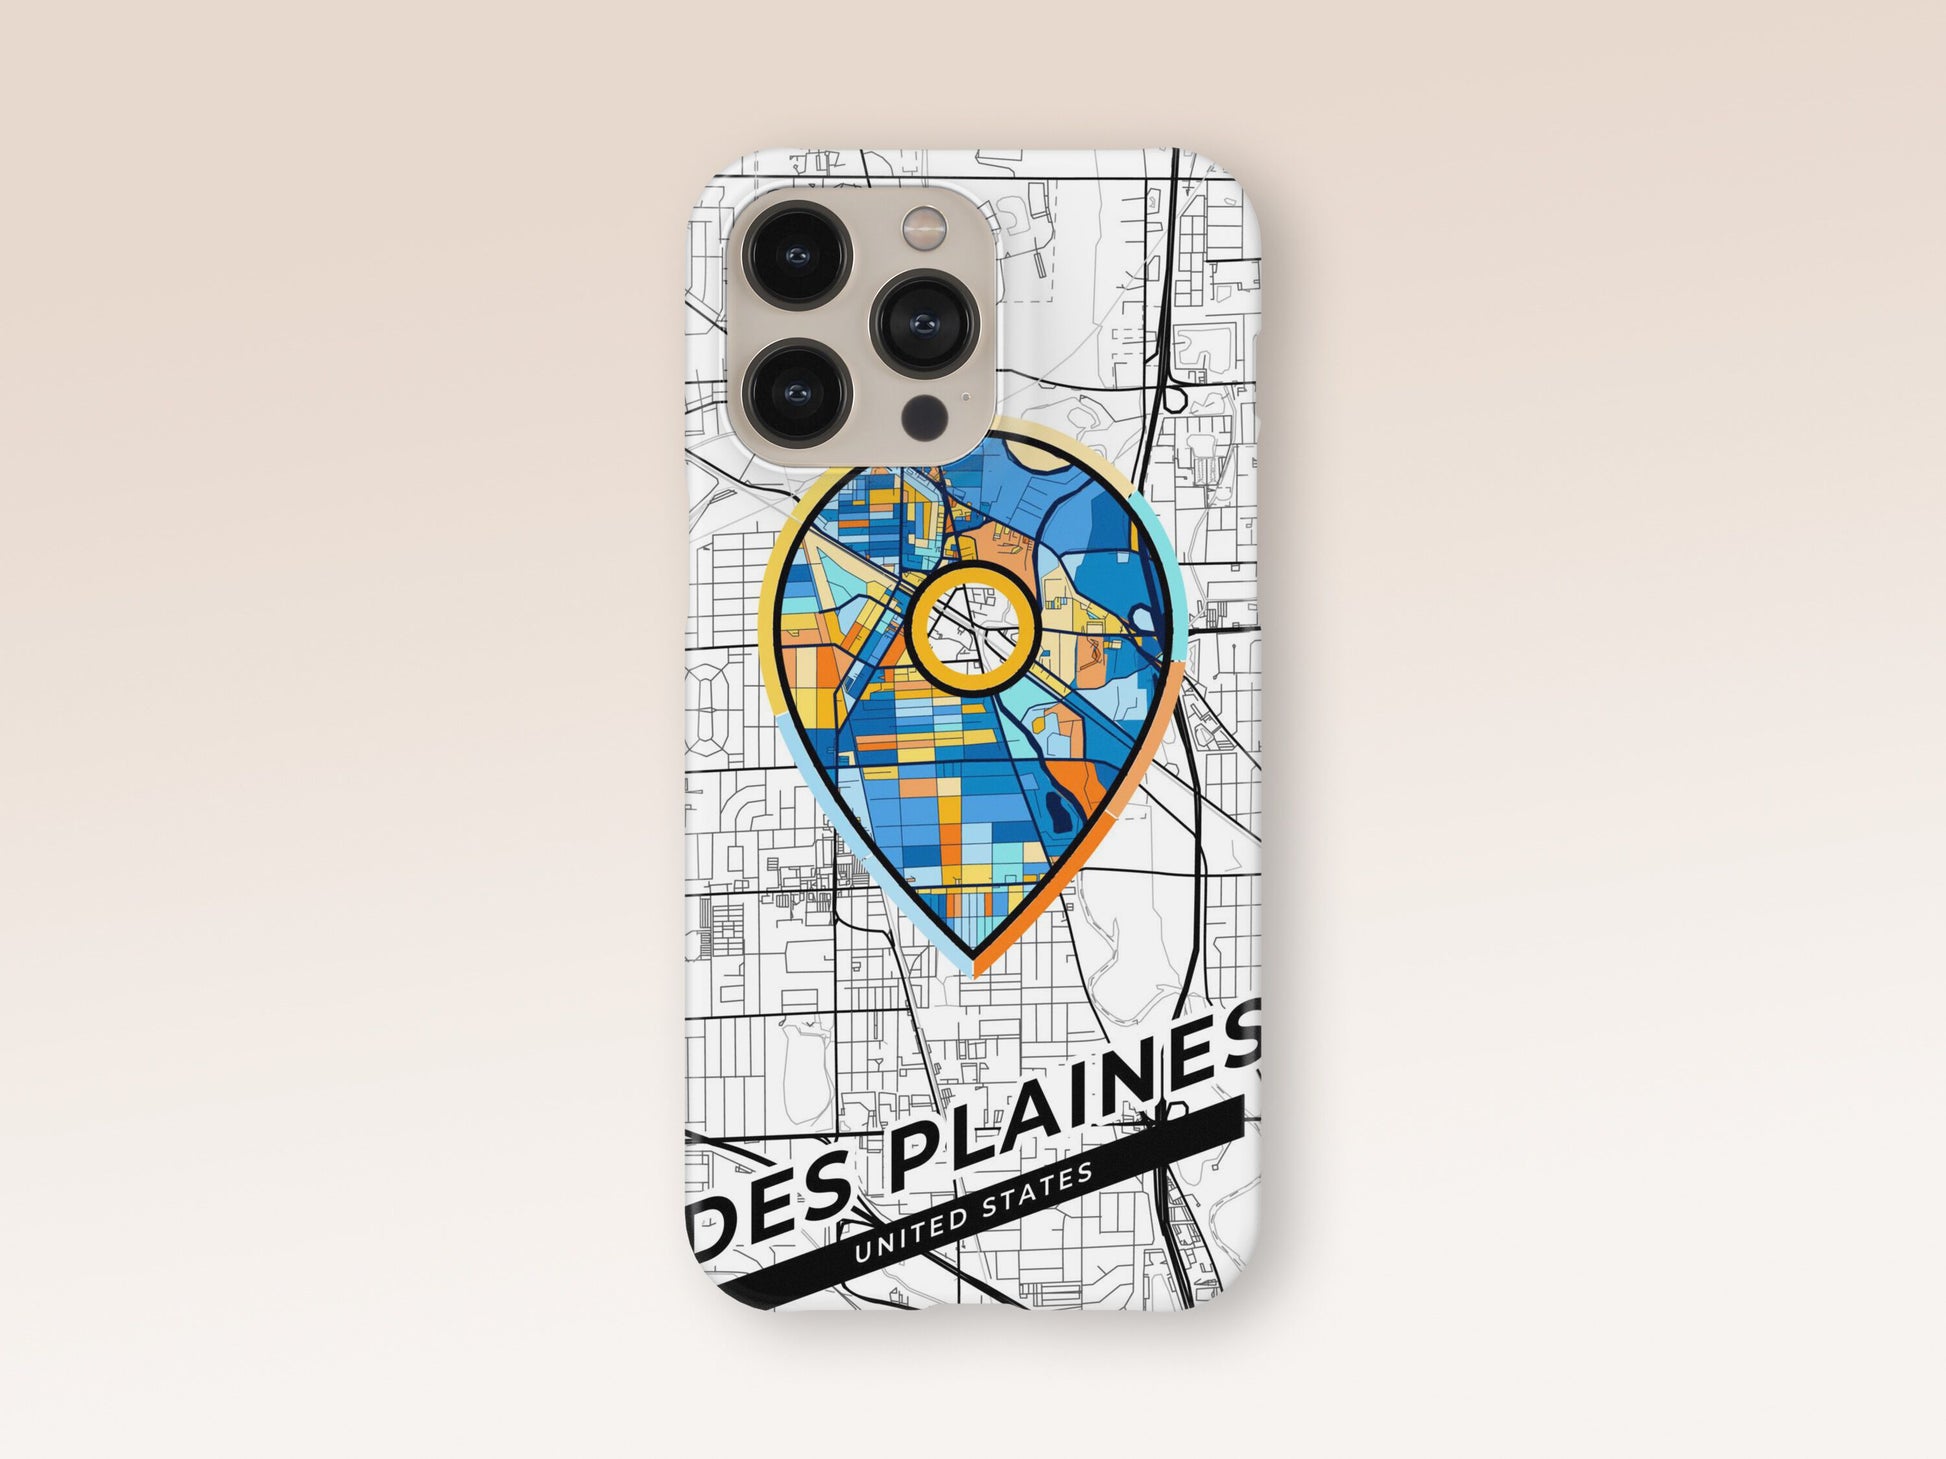 Des Plaines Illinois slim phone case with colorful icon. Birthday, wedding or housewarming gift. Couple match cases. 1